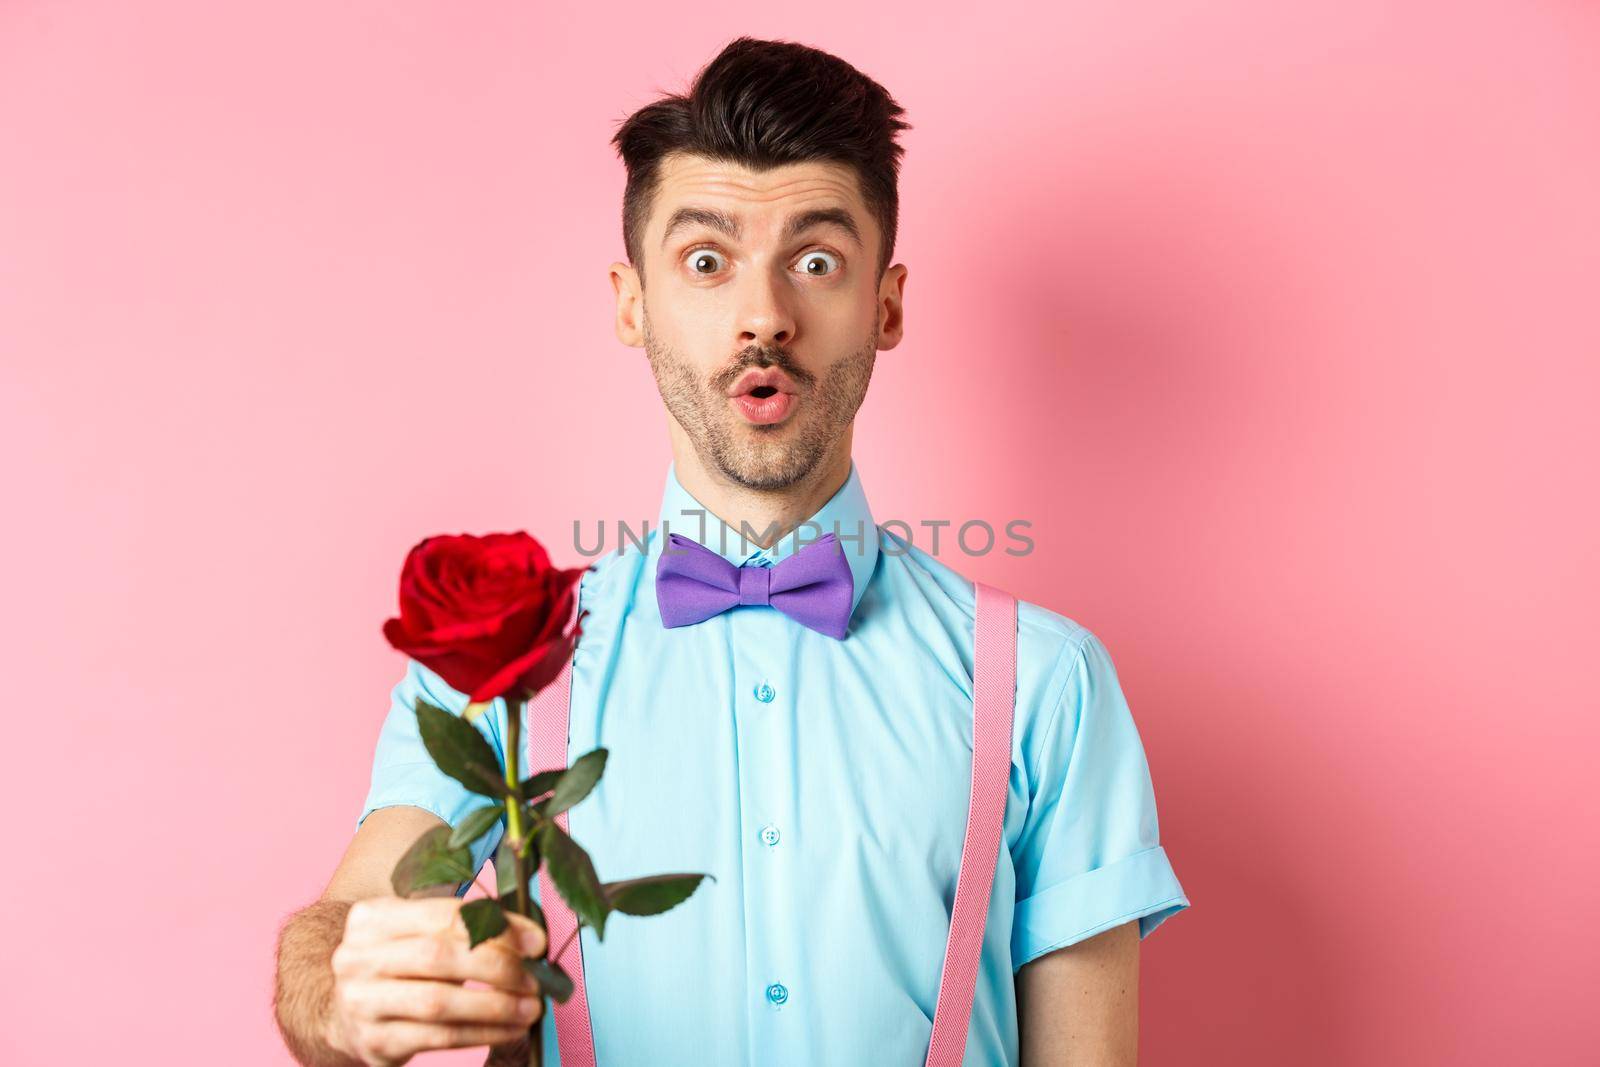 Valentines day and romance concept. Cute man in bow-tie giving red rose to you and looking with sympathy, standing on romantic pink background.